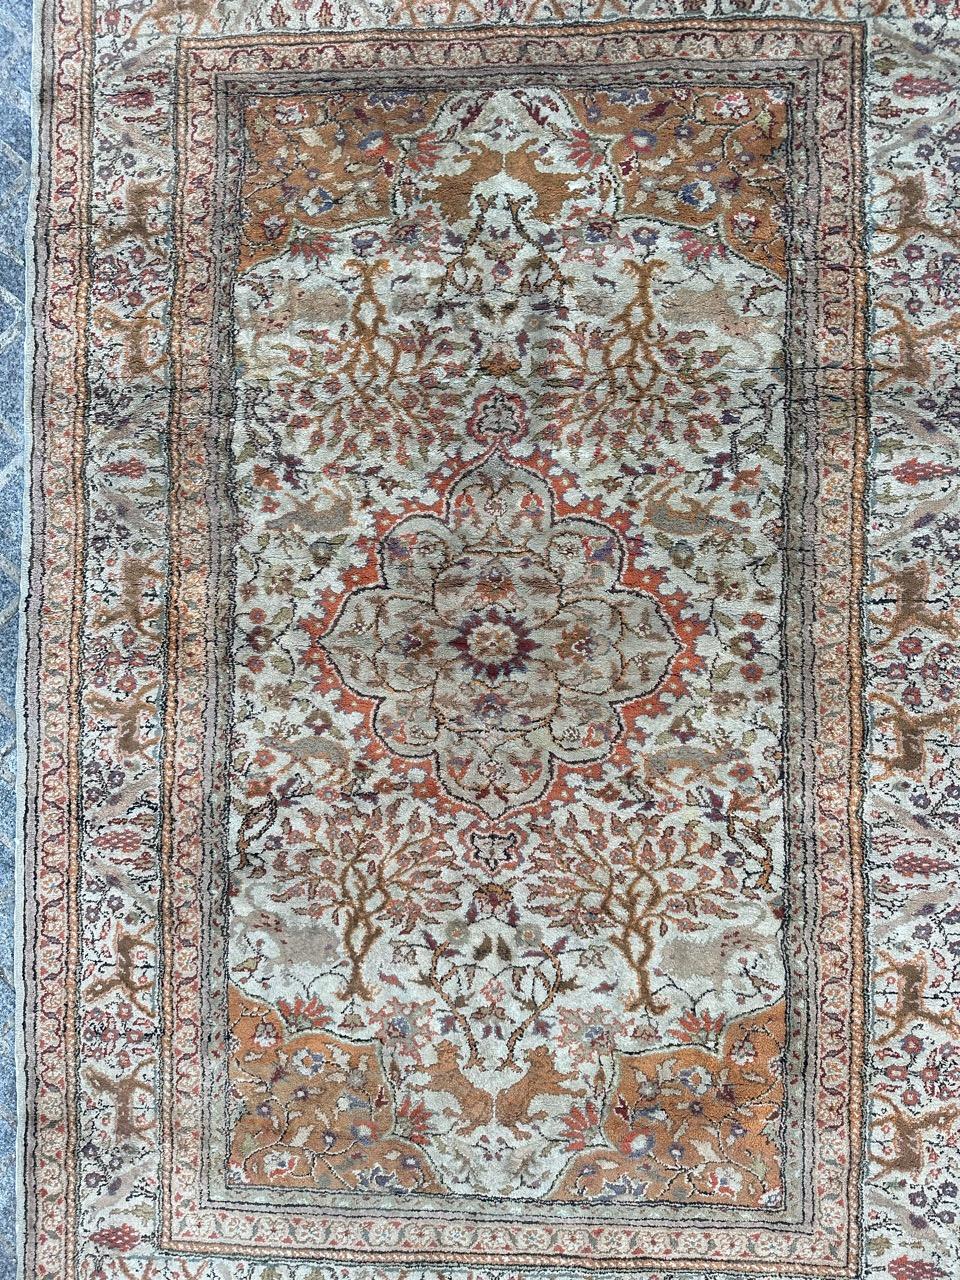 Immerse yourself in the intricate artistry of this handwoven masterpiece. This exquisite Turkish rug hails from the heart of Kayseri, meticulously crafted with a blend of silk and cotton on a cotton foundation. Its unique design is a visual